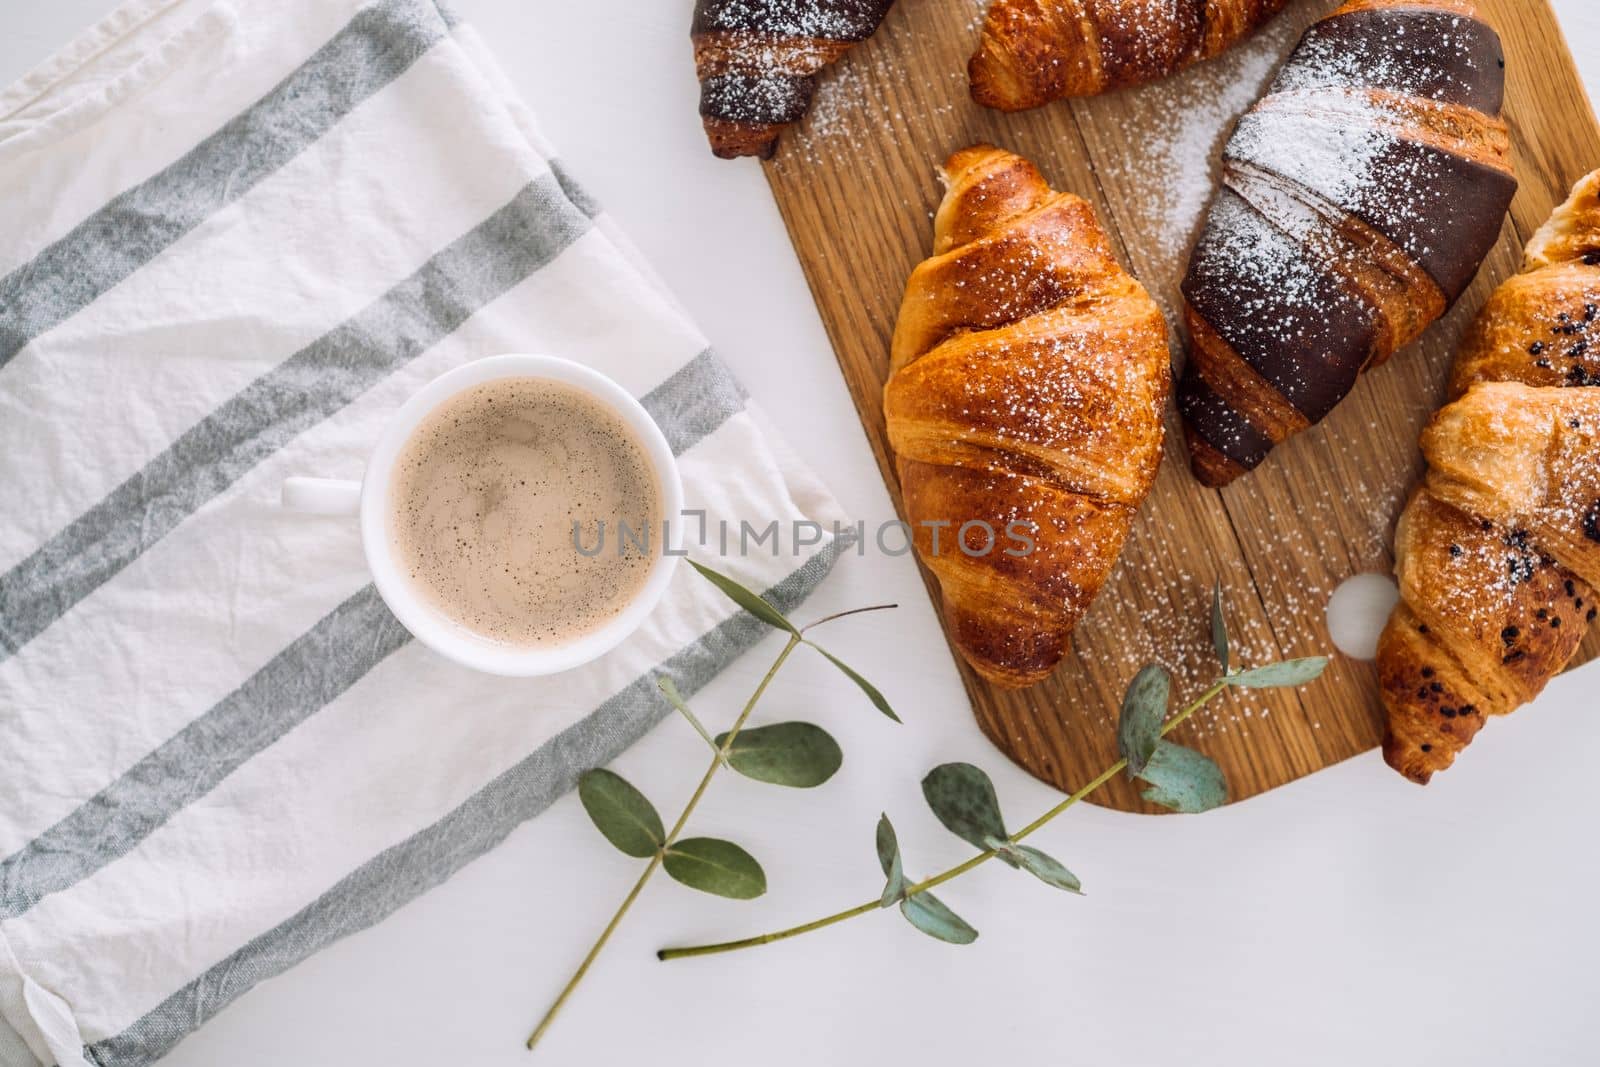 Cup of cappuccino with kitchen towel and eucalyptus branch, brown croissants on cutting board